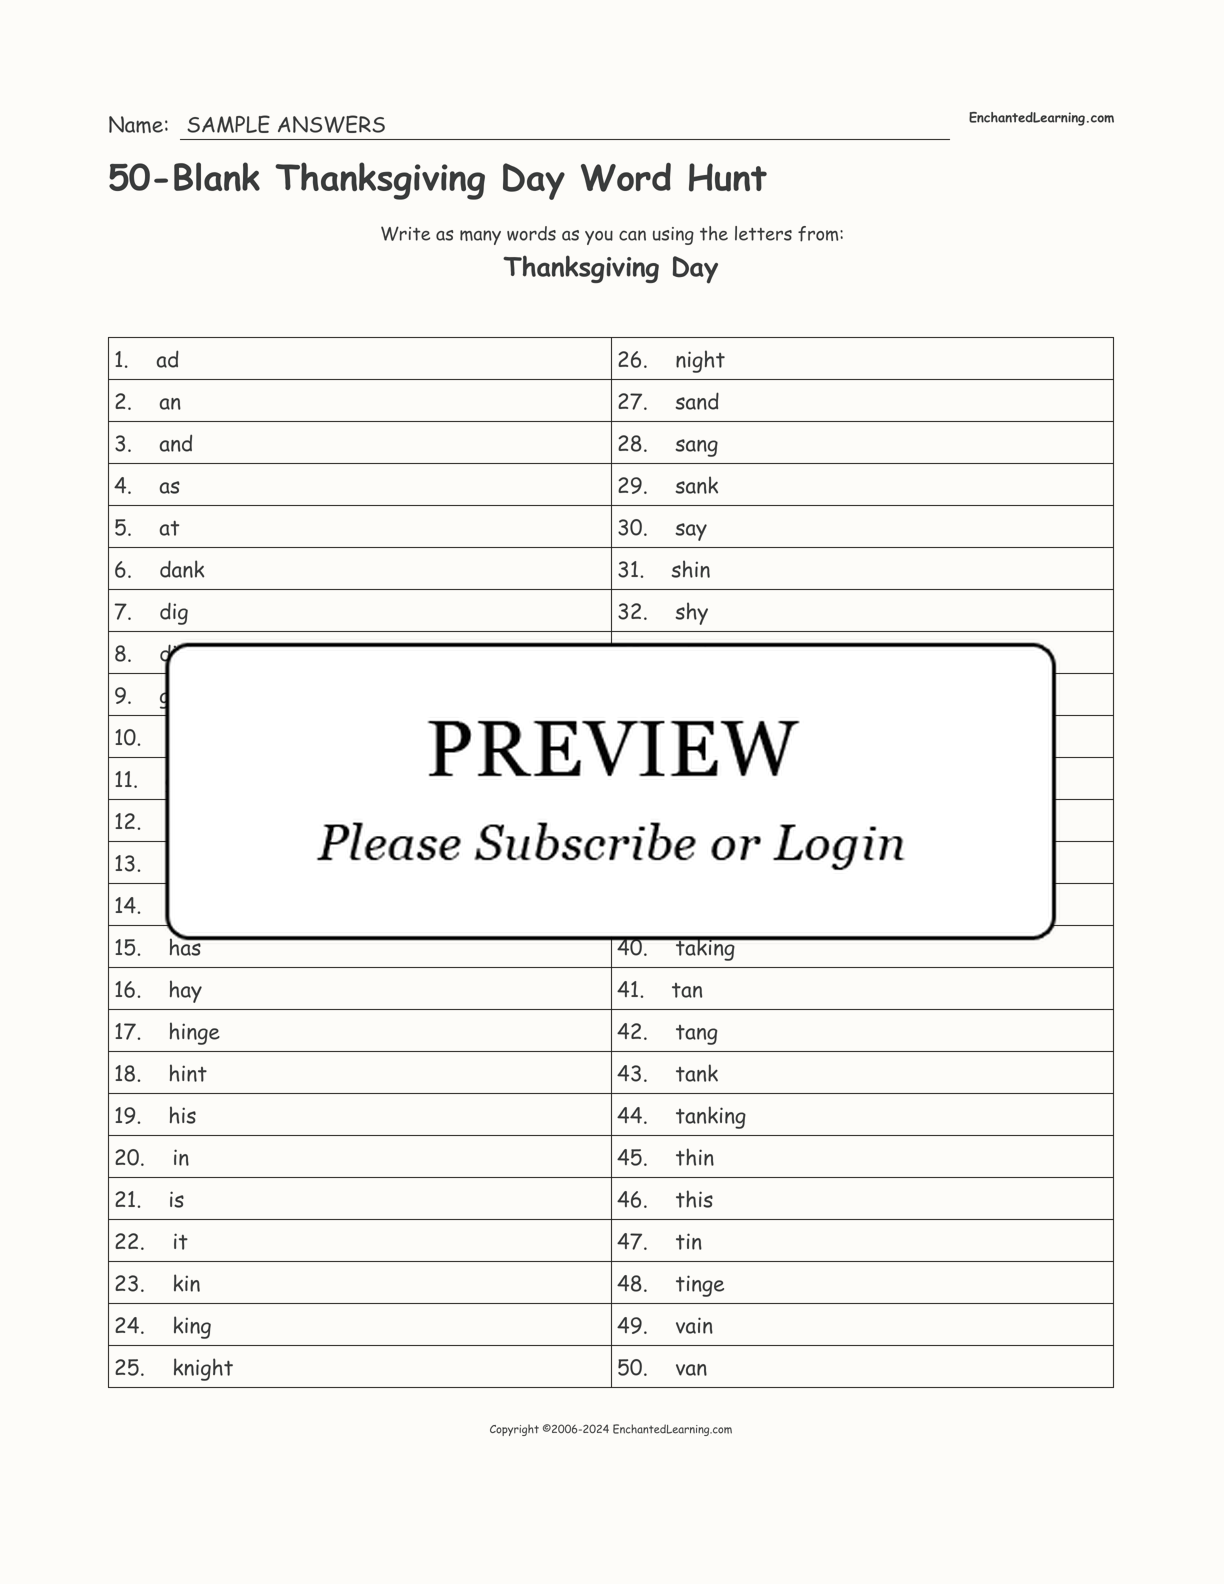 50-Blank Thanksgiving Day Word Hunt interactive worksheet page 2